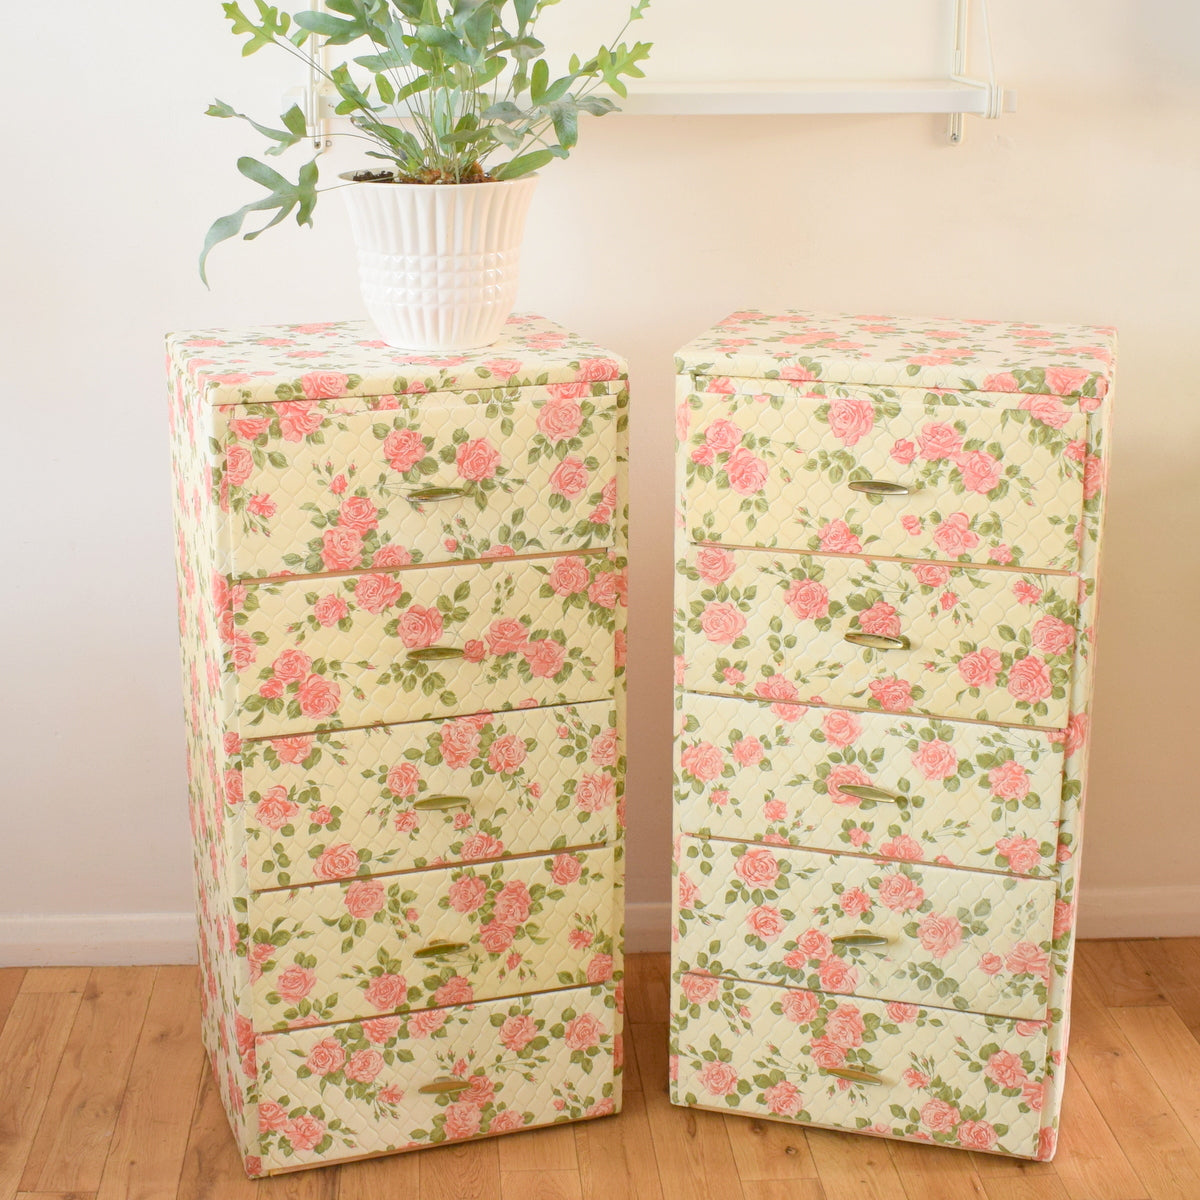 Vintage 1950s Padded Vinyl Rose Print Chest of Drawers - Pink (Pair Available)